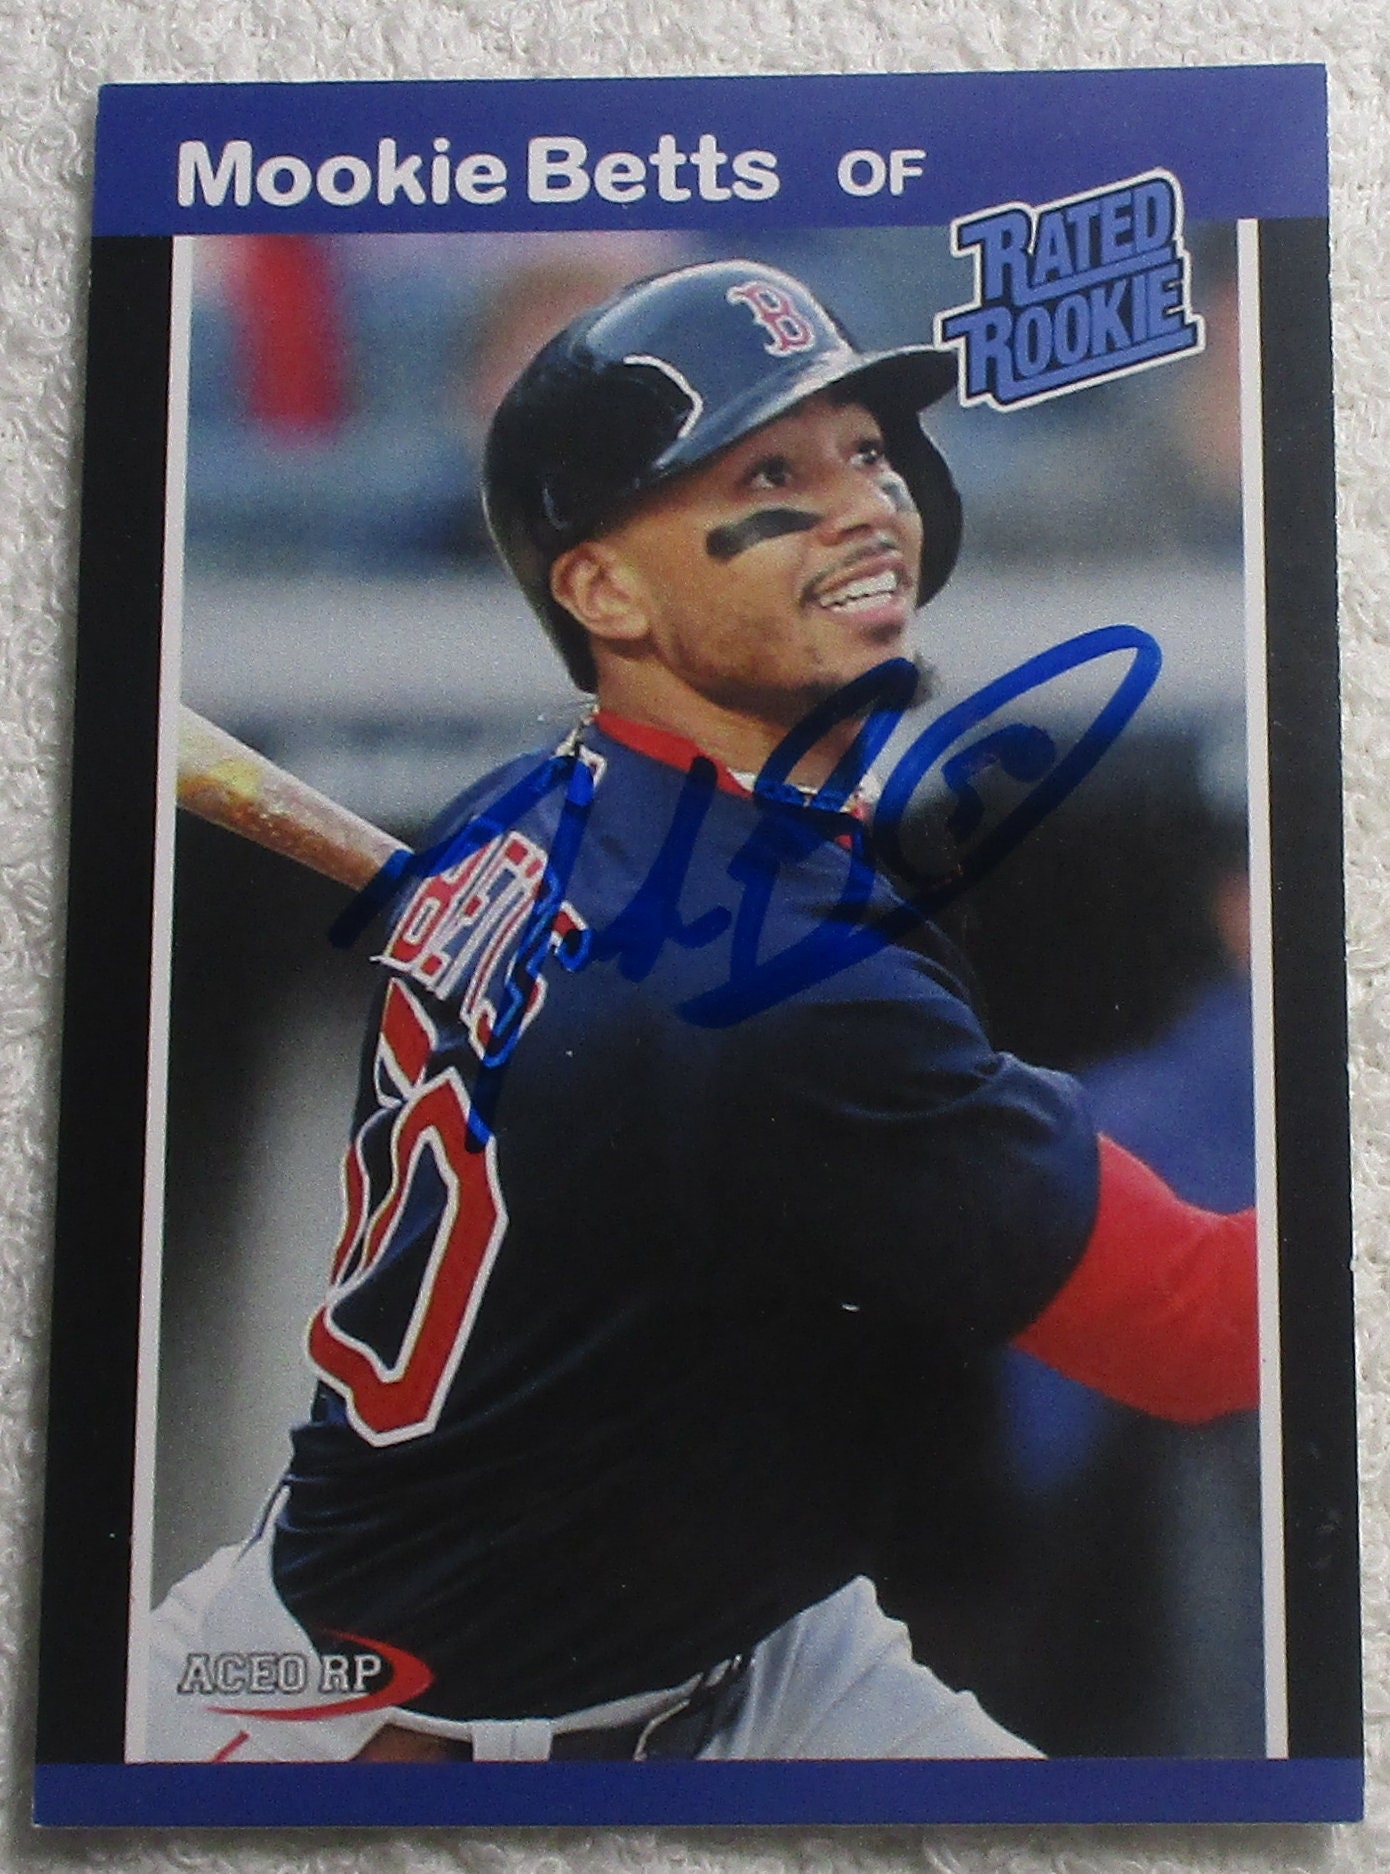 Mookie Betts Autographed Card Red Sox No COA 